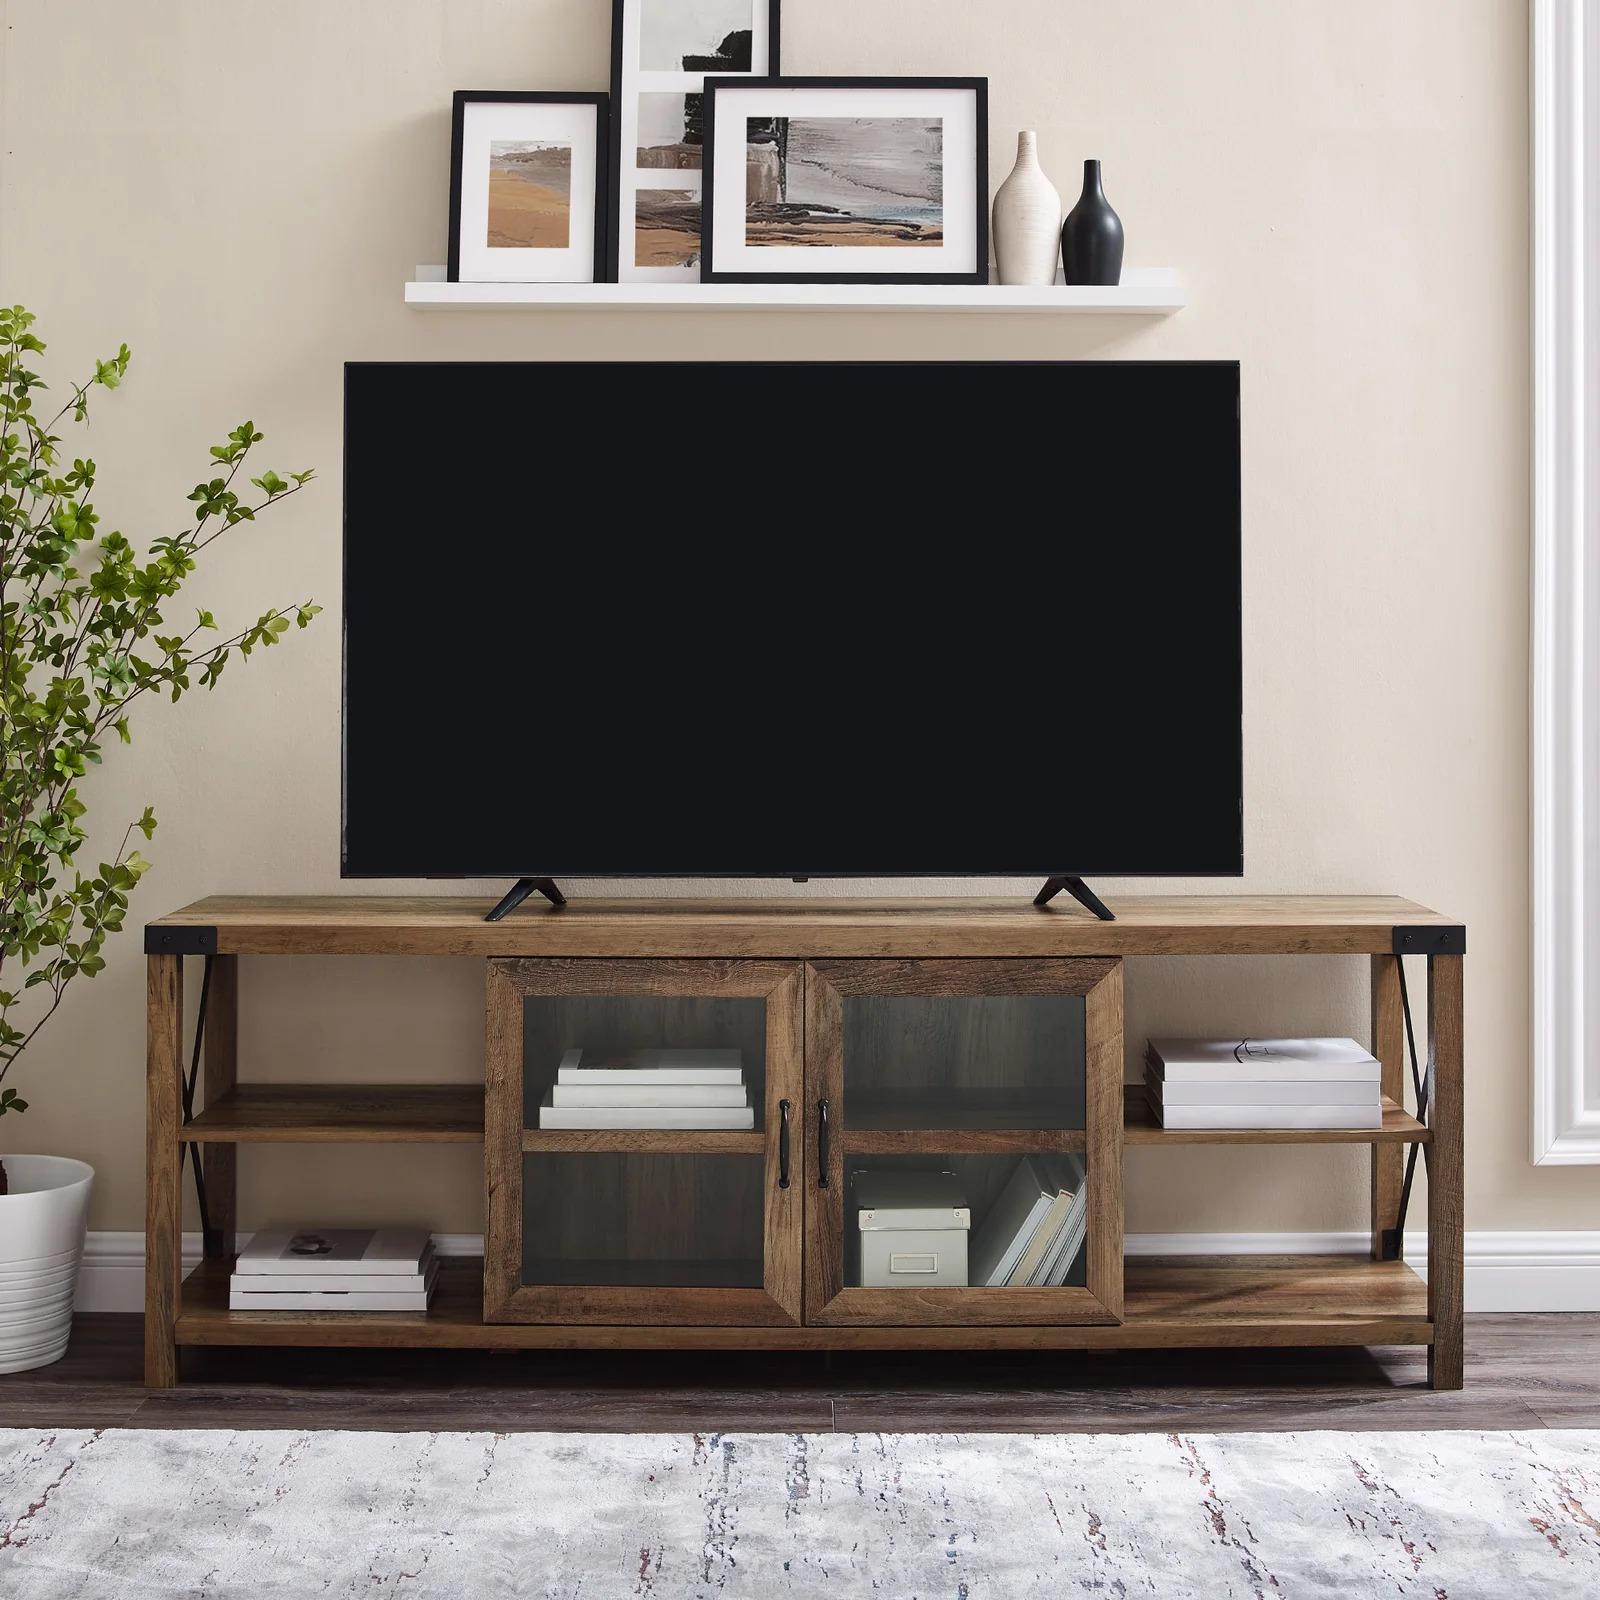 Here's an amazing Black Friday deal you don't want to miss!  30892c8b gwen tv stand for tvs up to 75